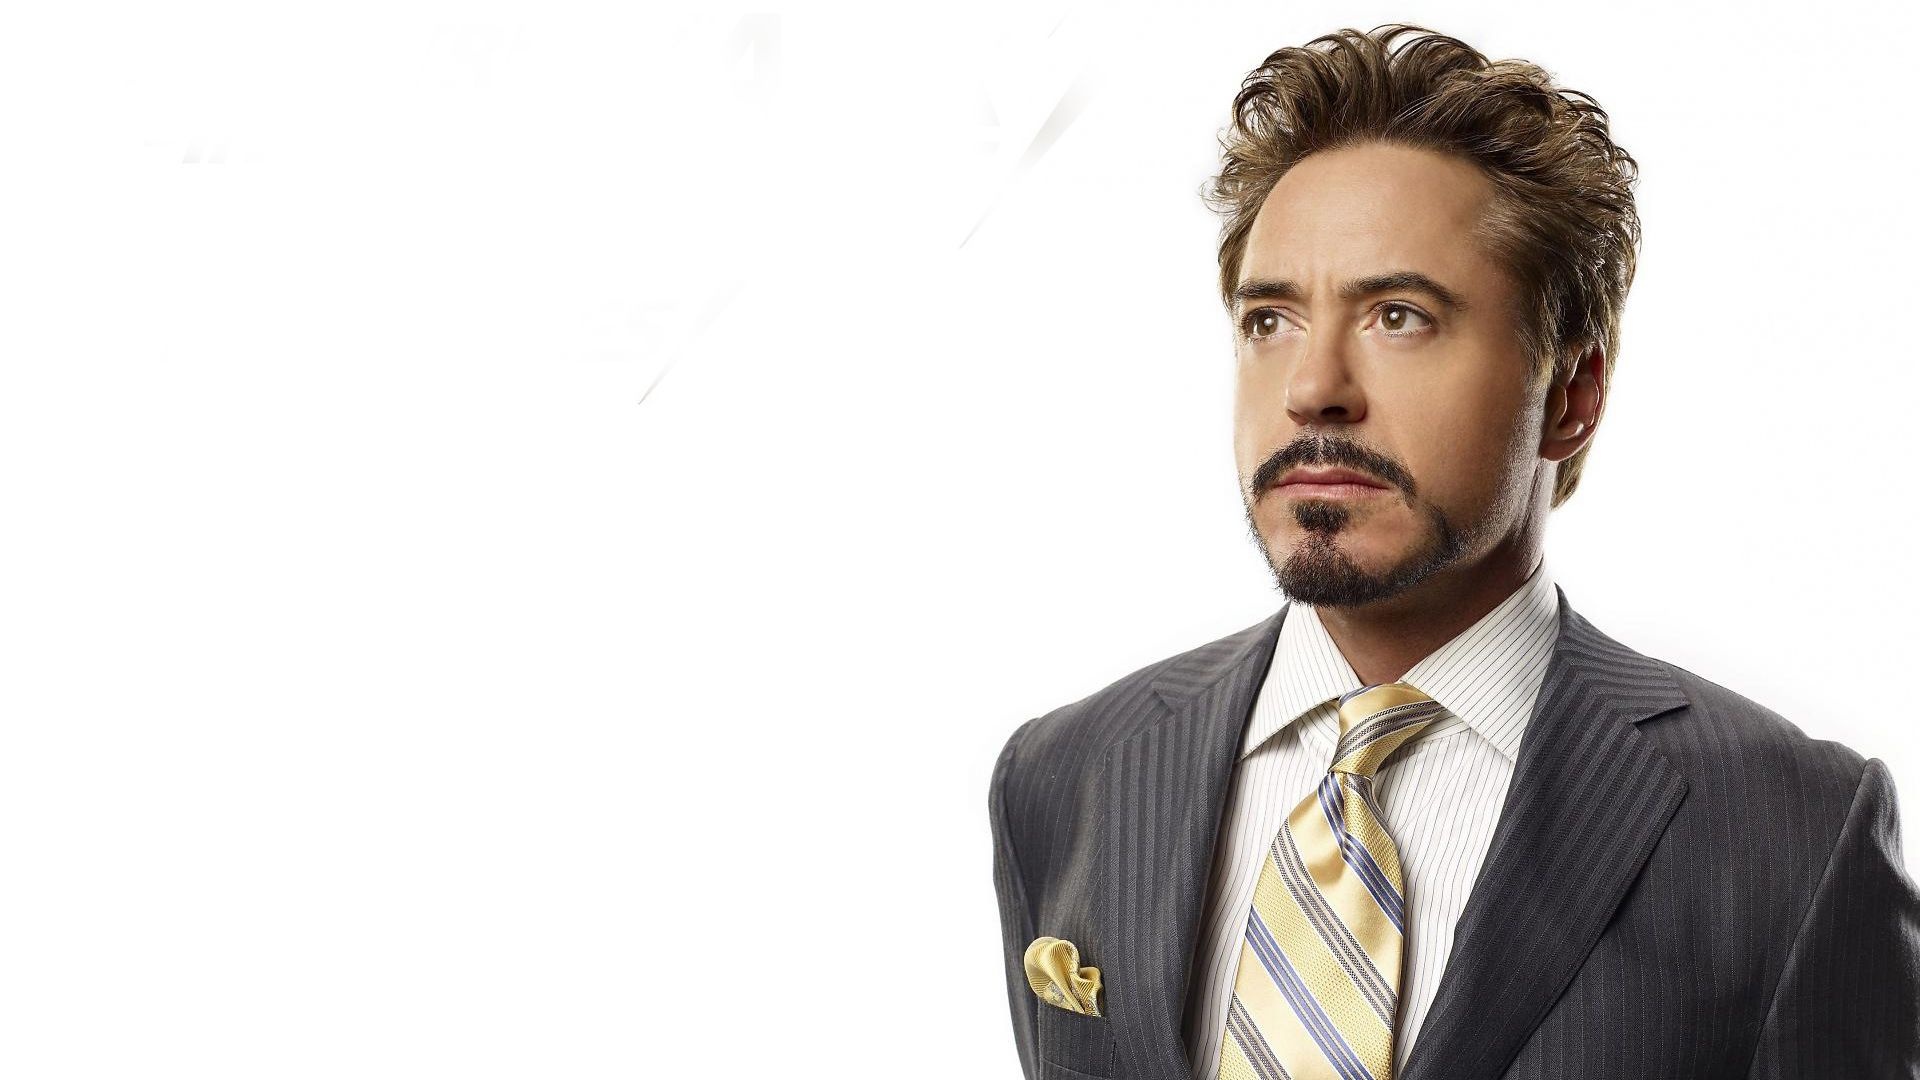 Robert Downey Jr.: Good Night, and Good Luck, The role of Joseph Wershba, a writer, editor, and correspondent for CBS News. 1920x1080 Full HD Wallpaper.